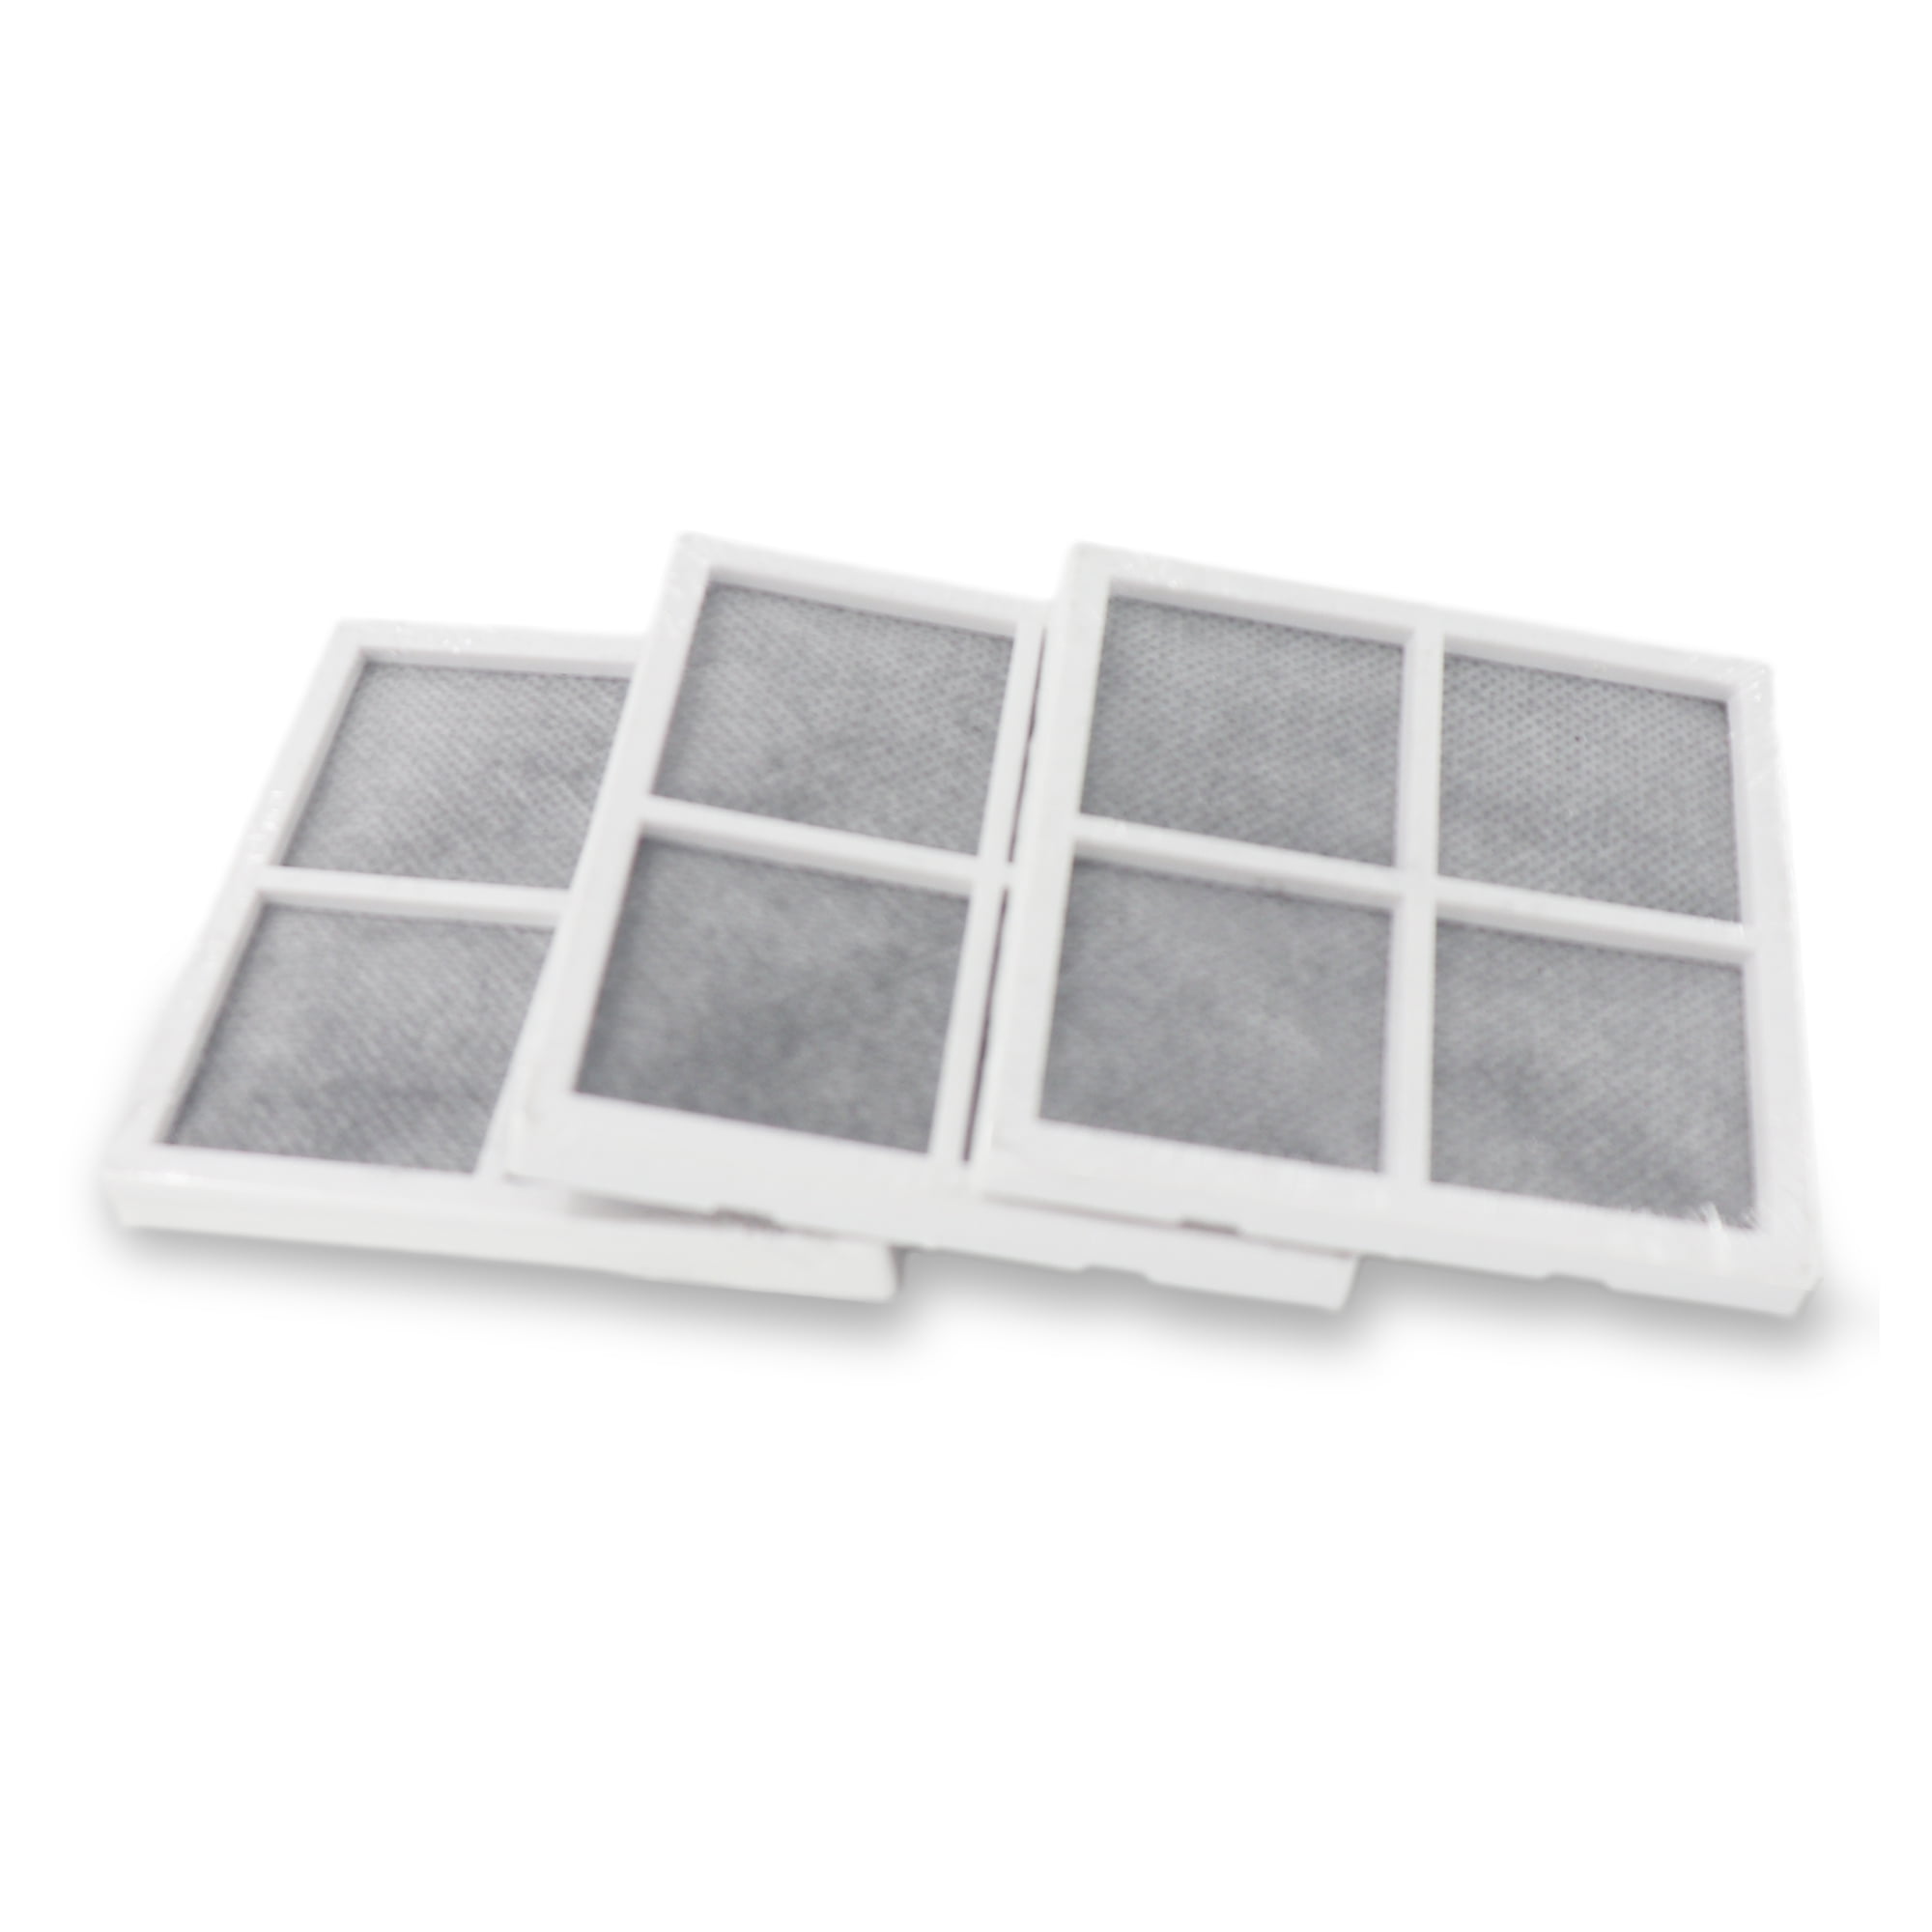 ADQ73334008 ADQ73214404 LT120F For LG Refrigerator Air Filter Pack Of 3